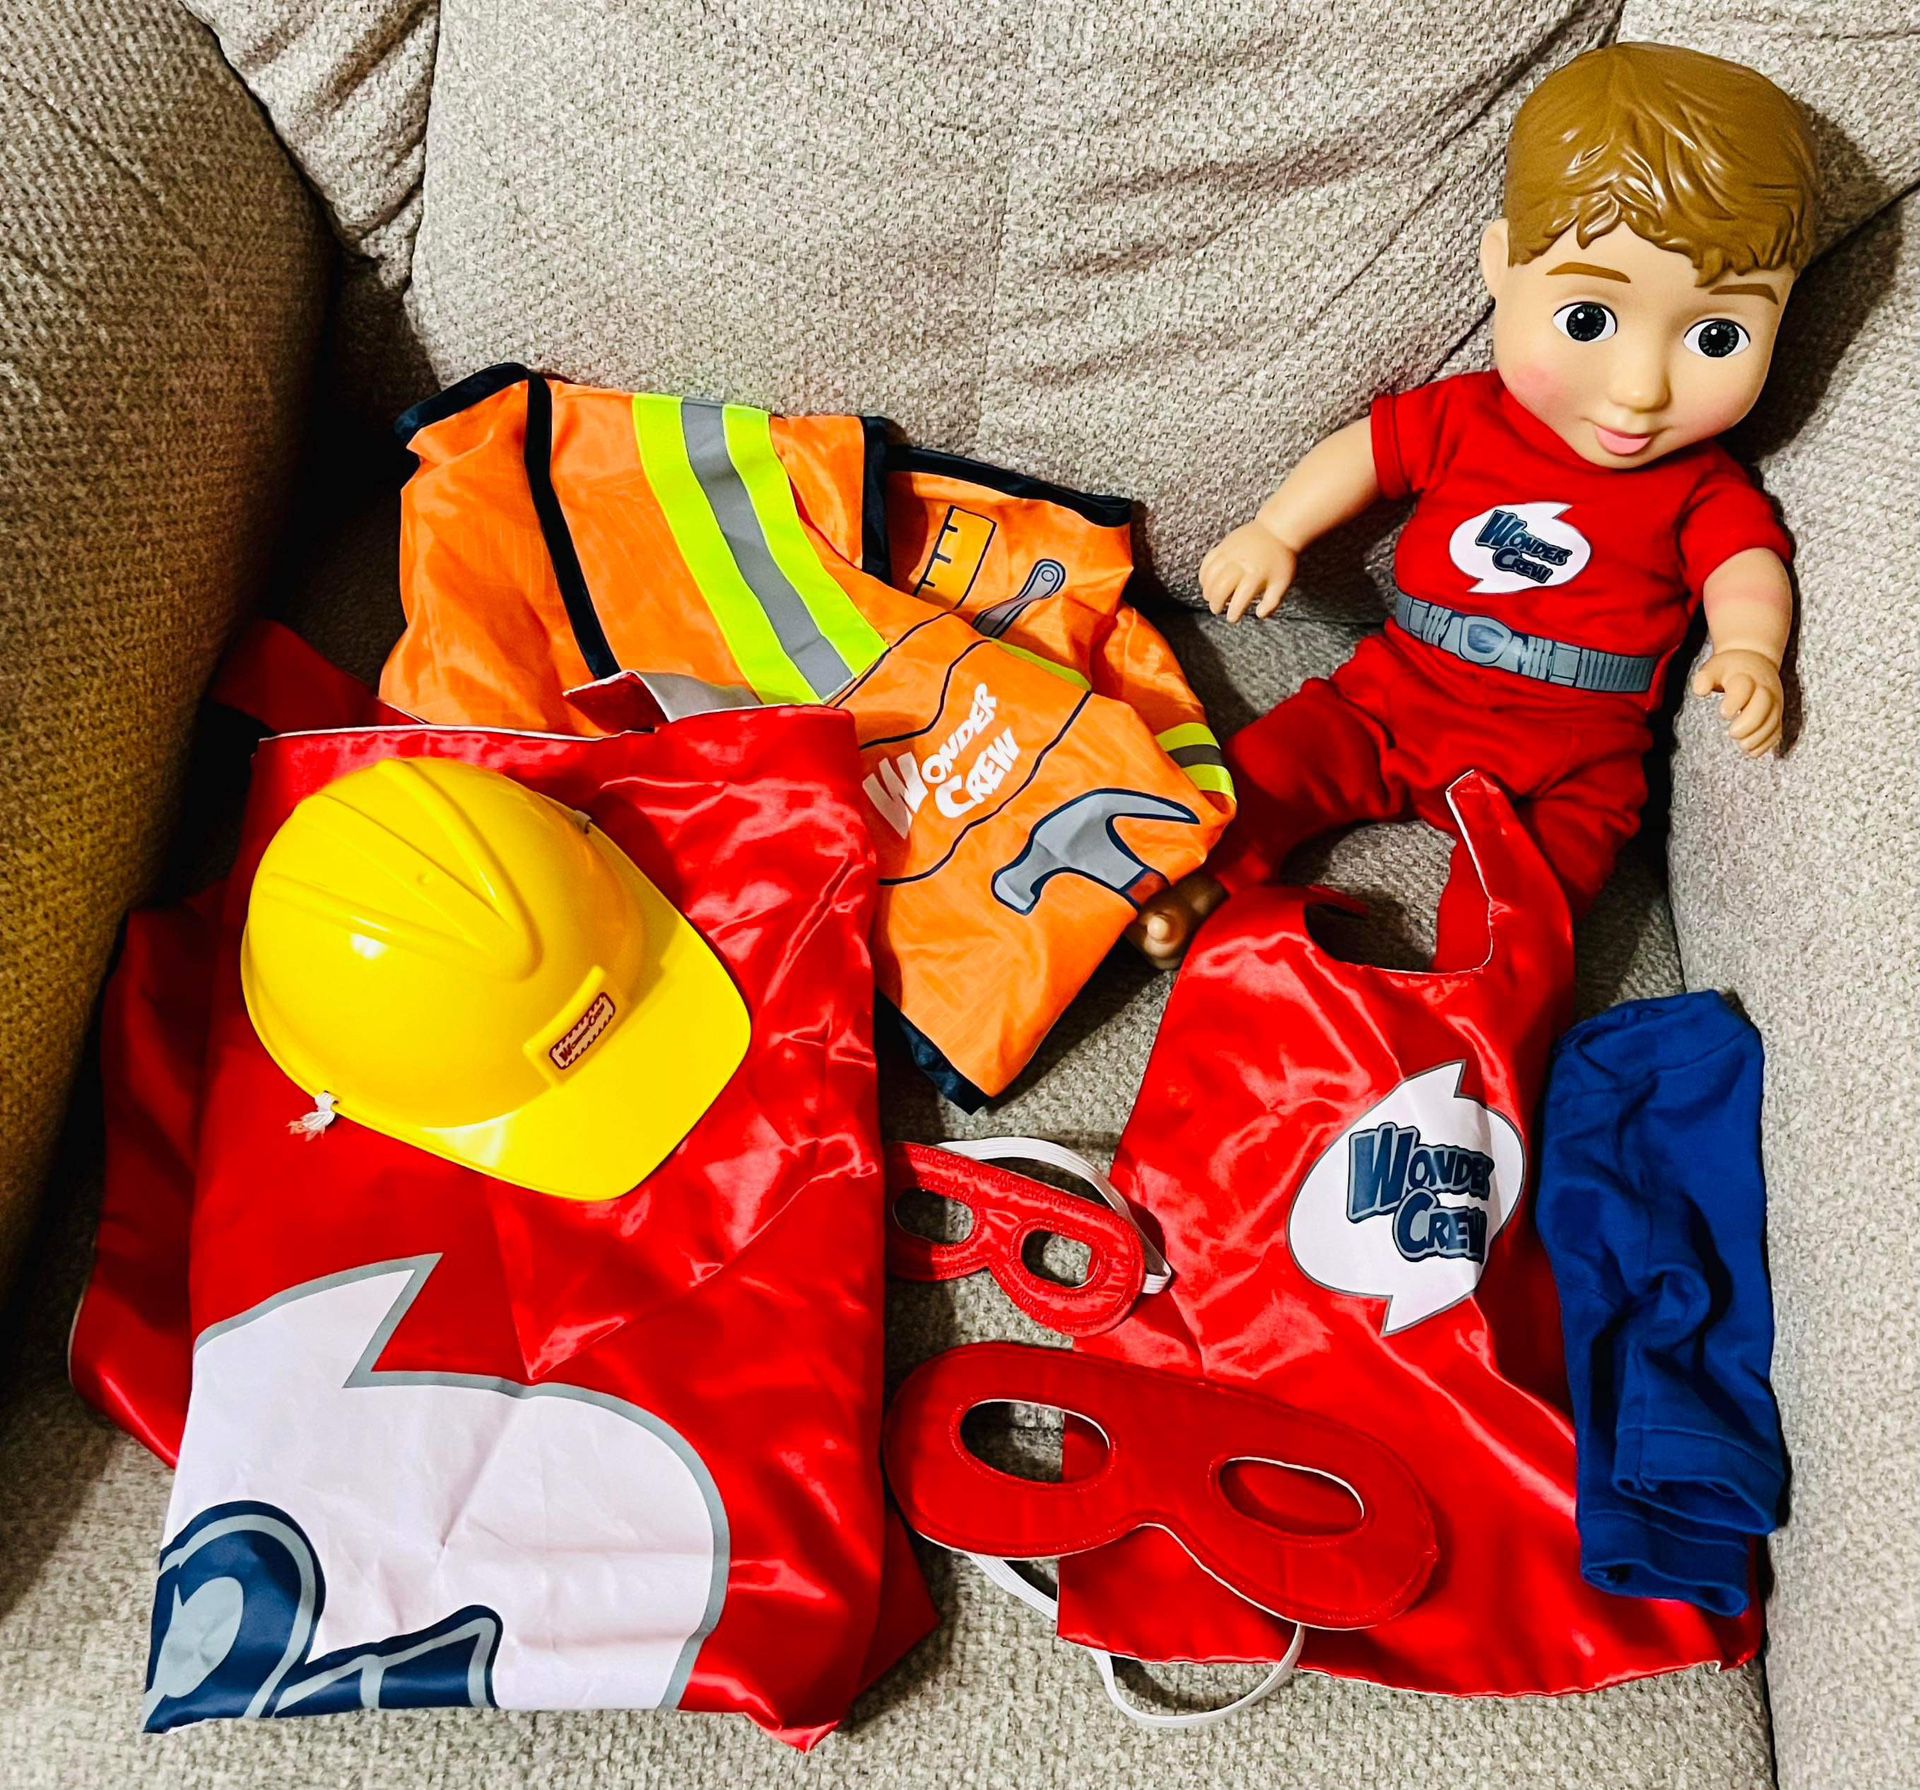 Wonder Crew Superhero Boy Doll with Matching Cape for Child Plus Accessories 